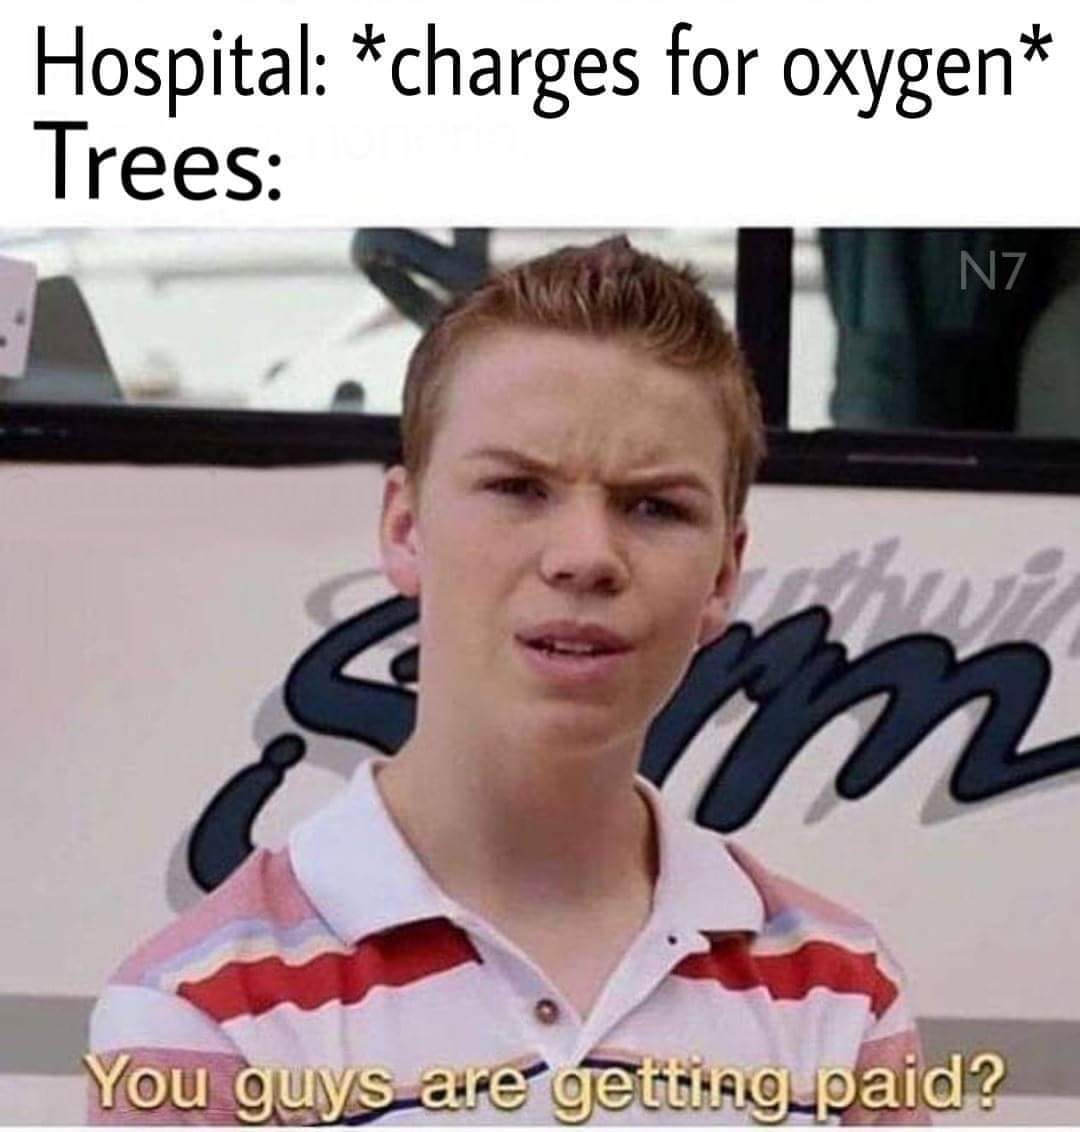 hospital charges for oxygen trees - Hospital charges for oxygen Trees Nz You guys are getting paid?